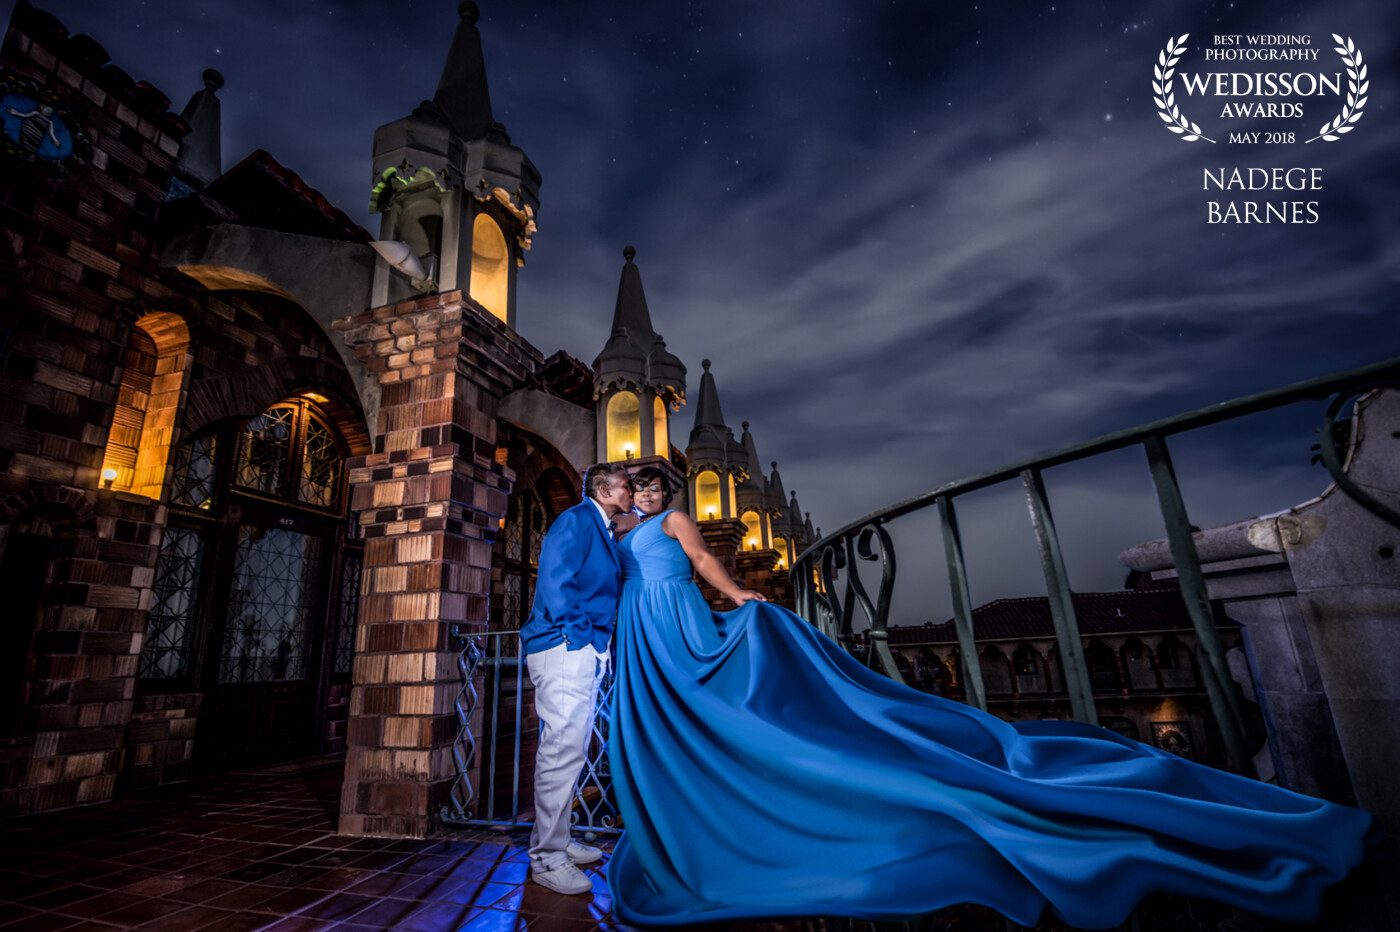 Taking night time pictures is one of my passion. I also love Disney  and castles. Well, this one was pretty much a combination of everything I love. We worked a lot of the wardrobe because i wanted some drama. tHey wedding colors were blue and white, which was perfect to pop them out in the photograph. So romantic....